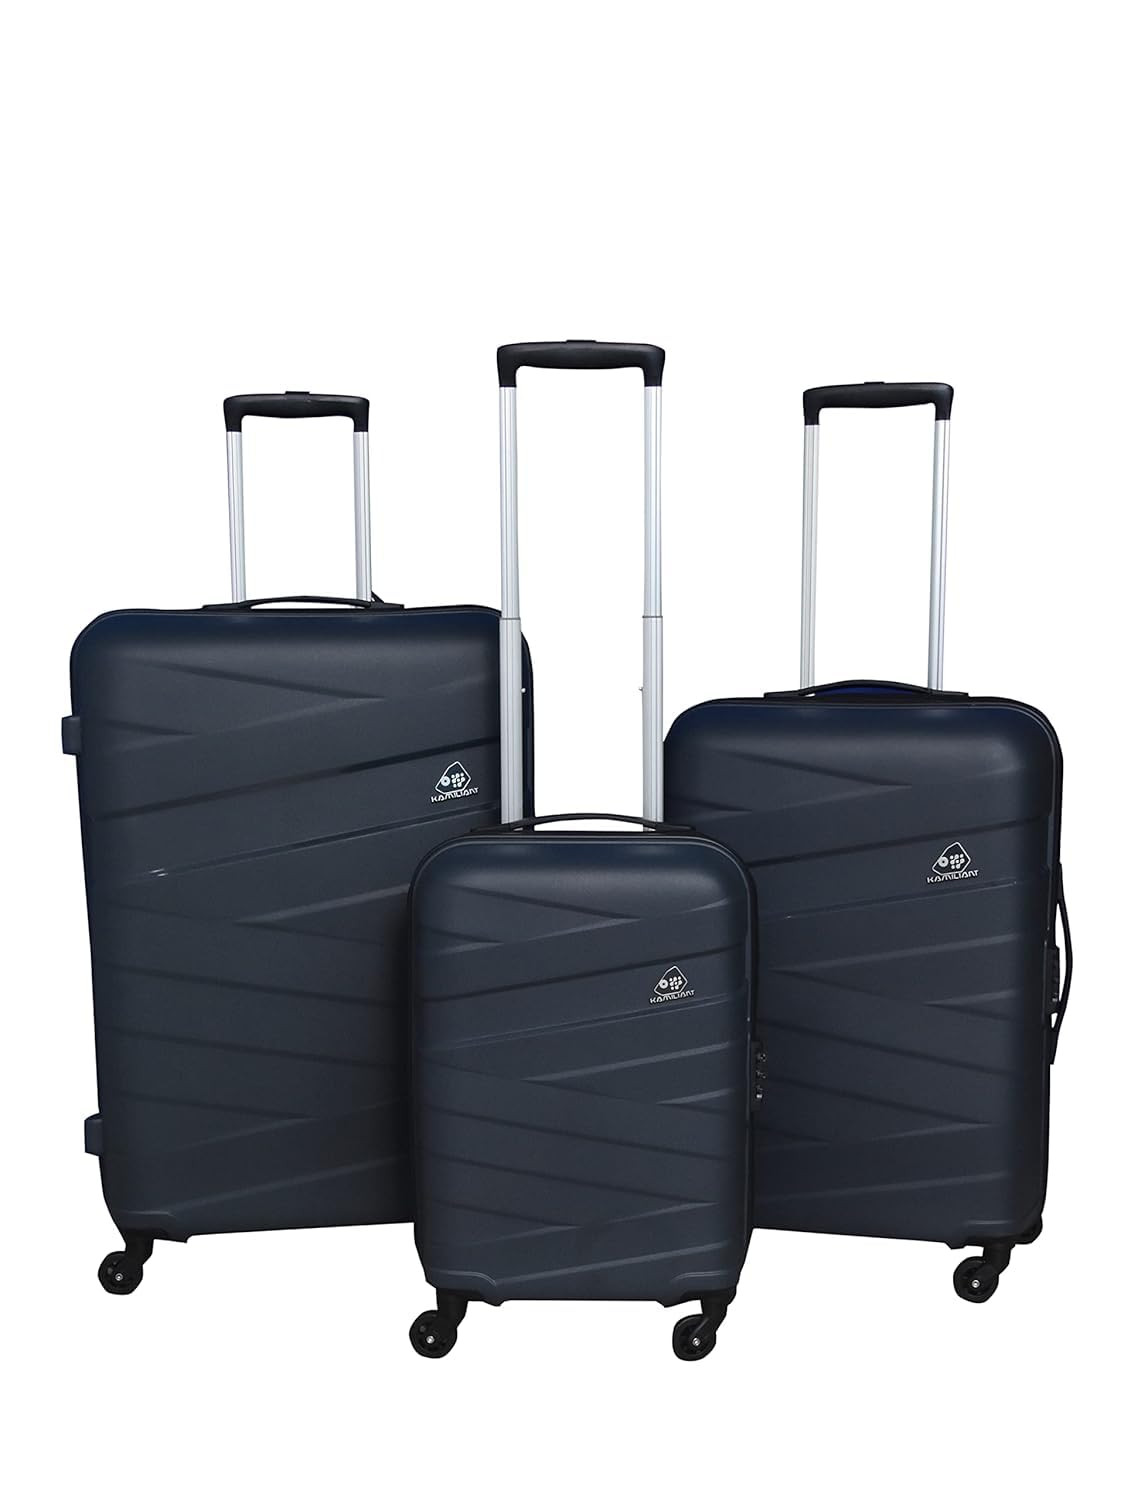 Kamiliant Black Flacon Lite American Tourister Trolly Bag 4 Wheel Cabin  Size, For Travelling at Rs 1850 in New Delhi